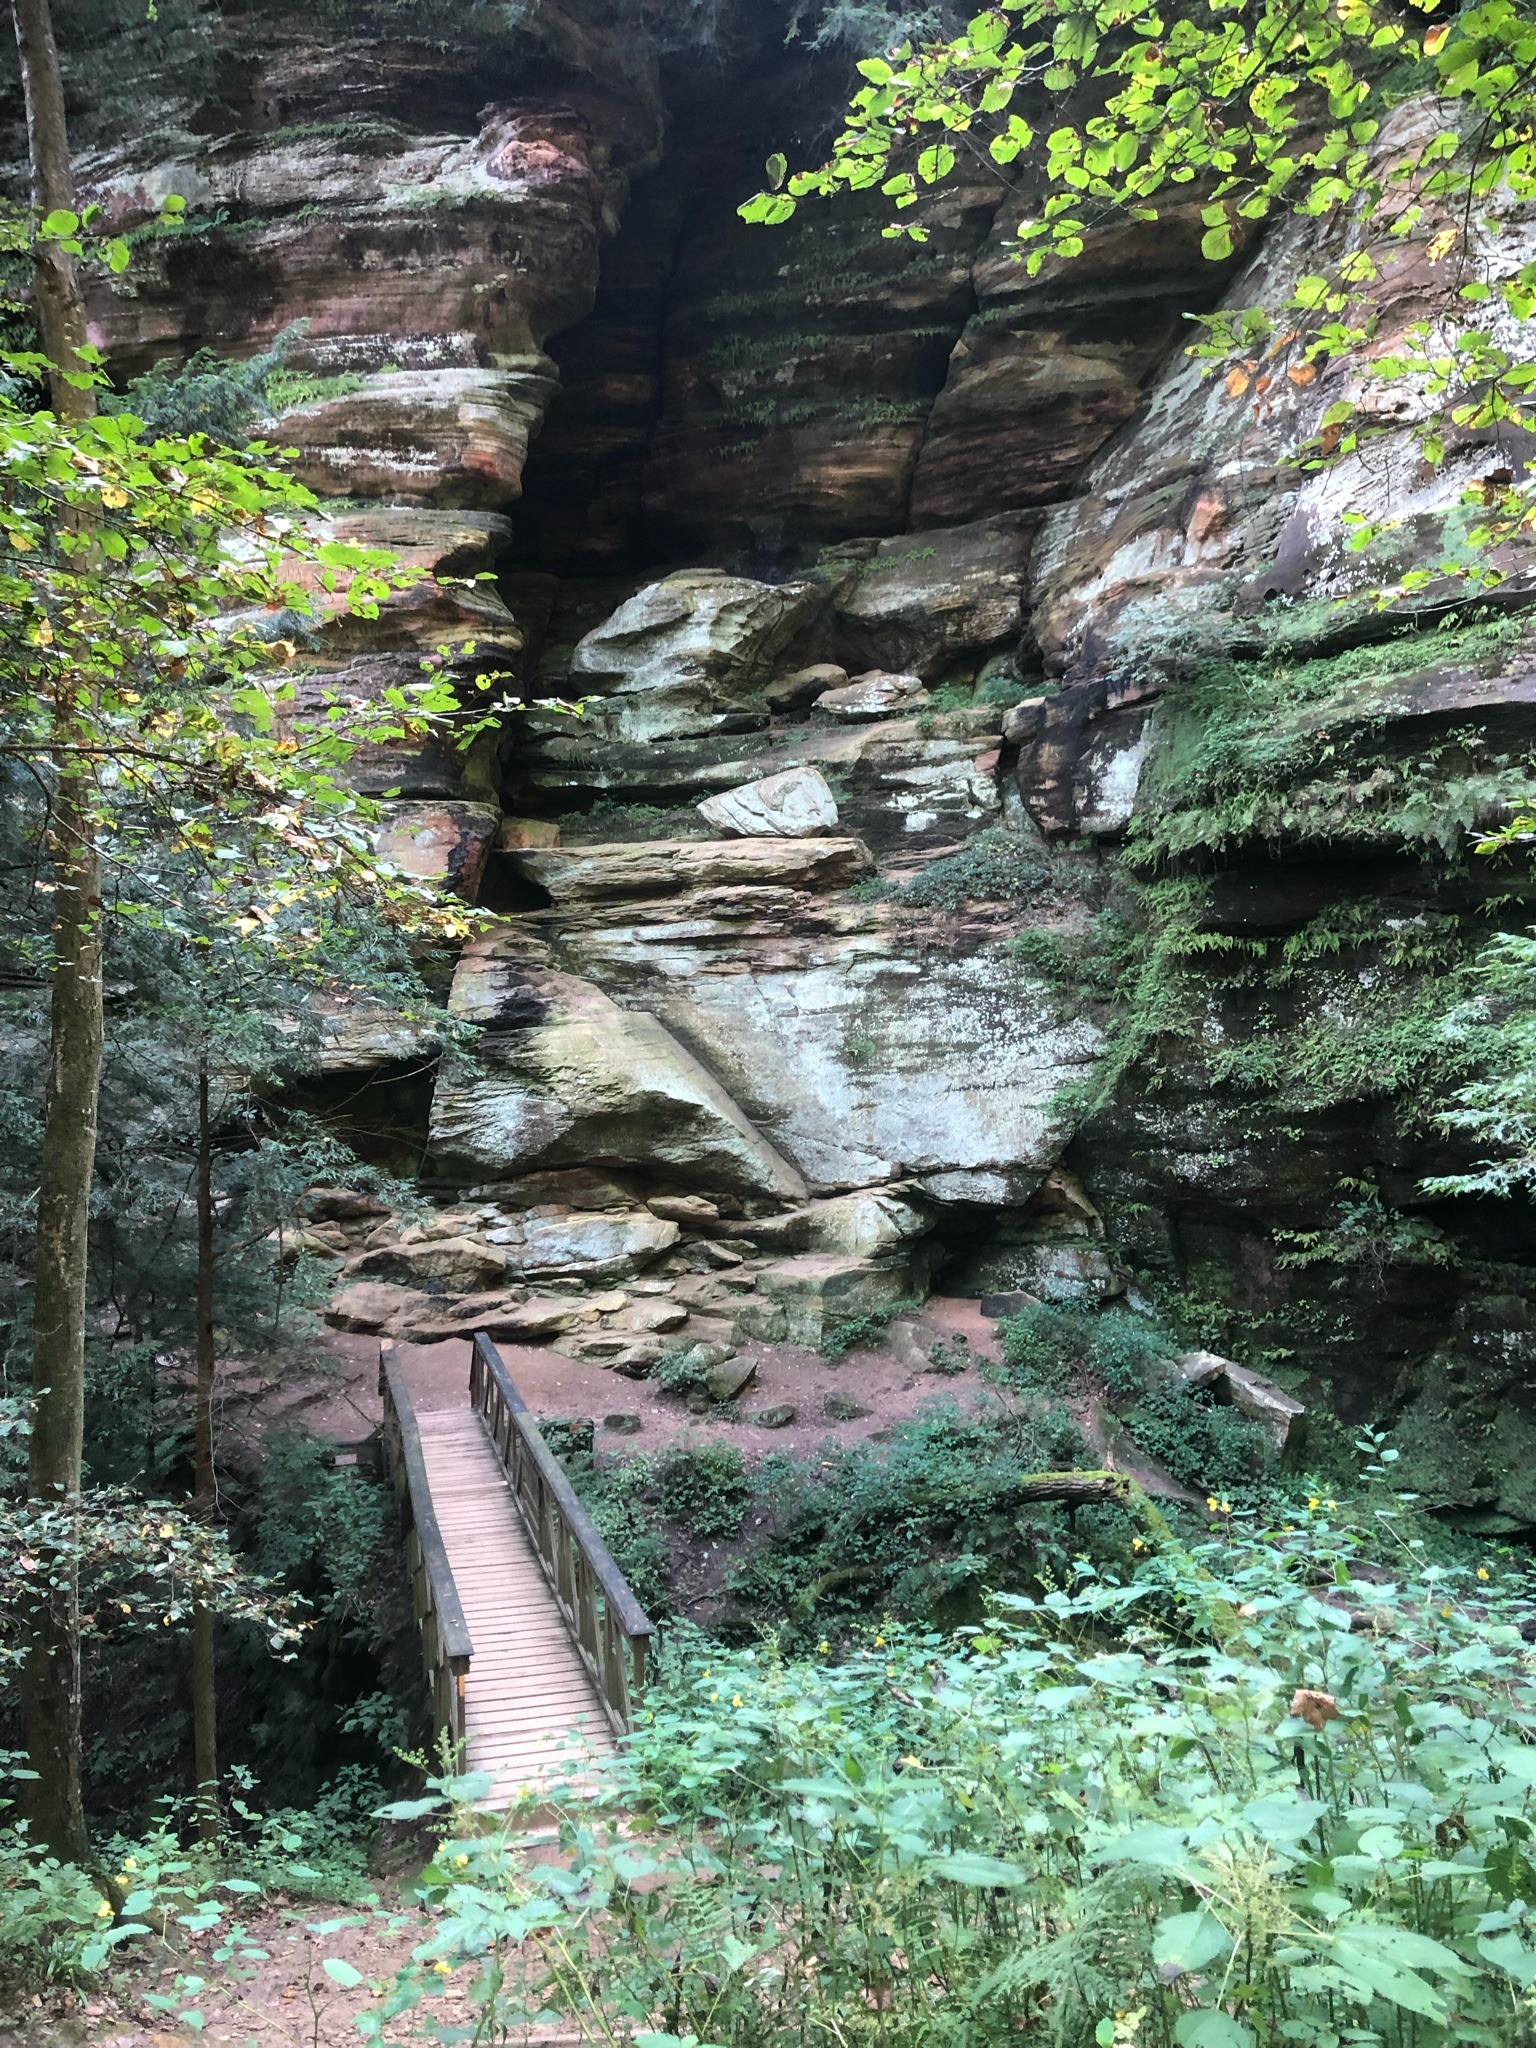 Final hikes in Hocking Hills before heading back north , Rock House and Ash Cave with babe. Had a great weekend 😊❤️ @katiiie-lynn 